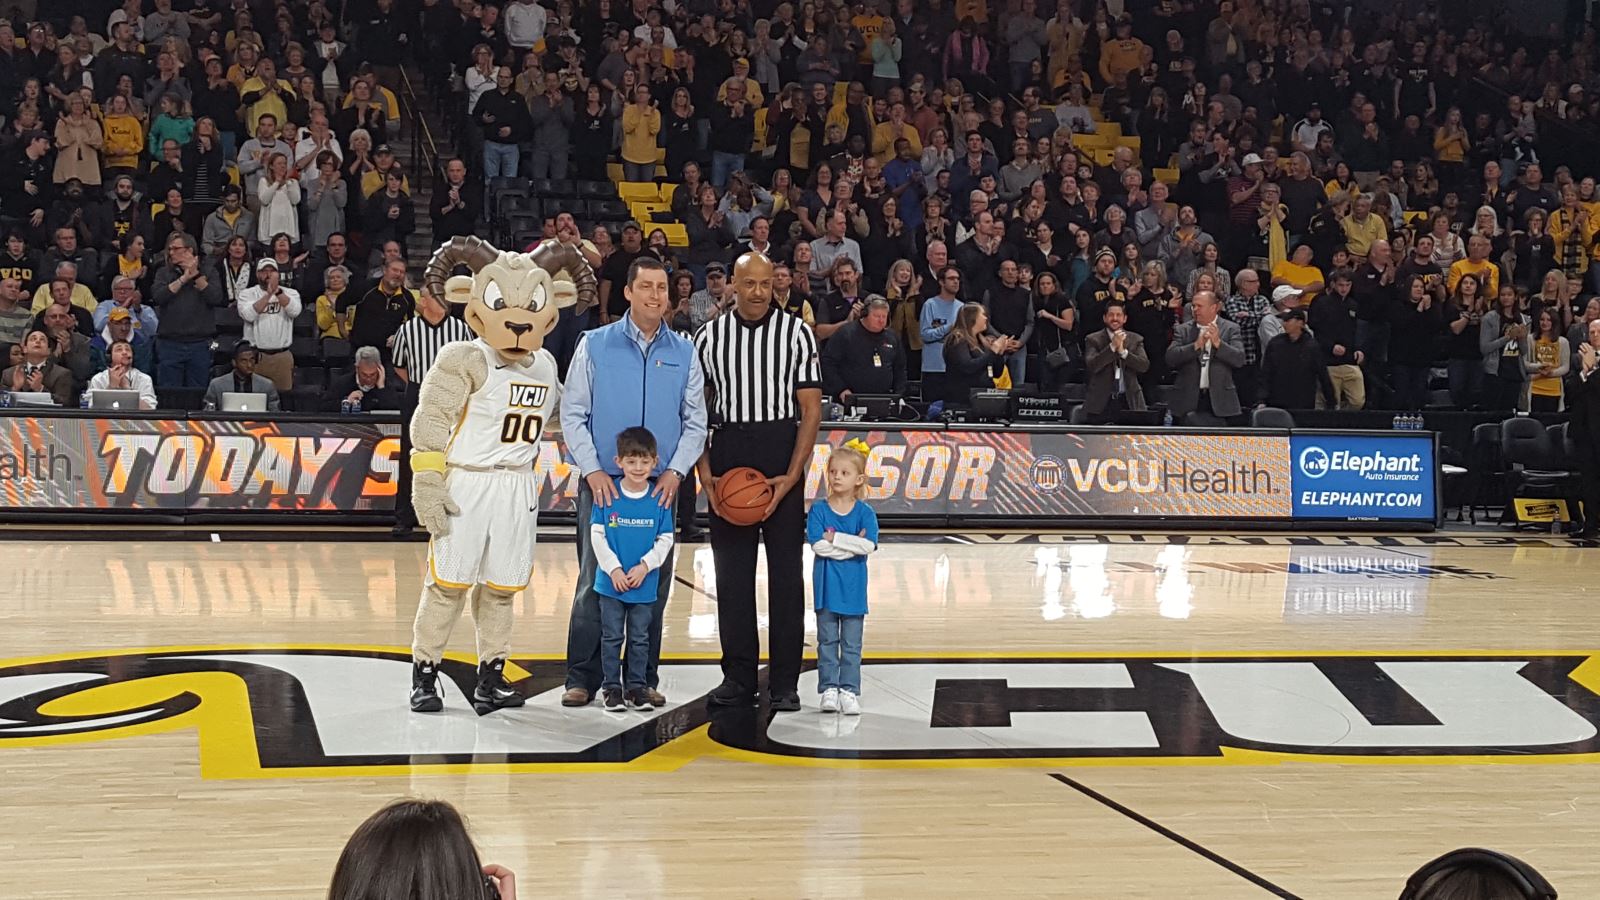 VCU mascot with CHoR patients celebrating on basketball court